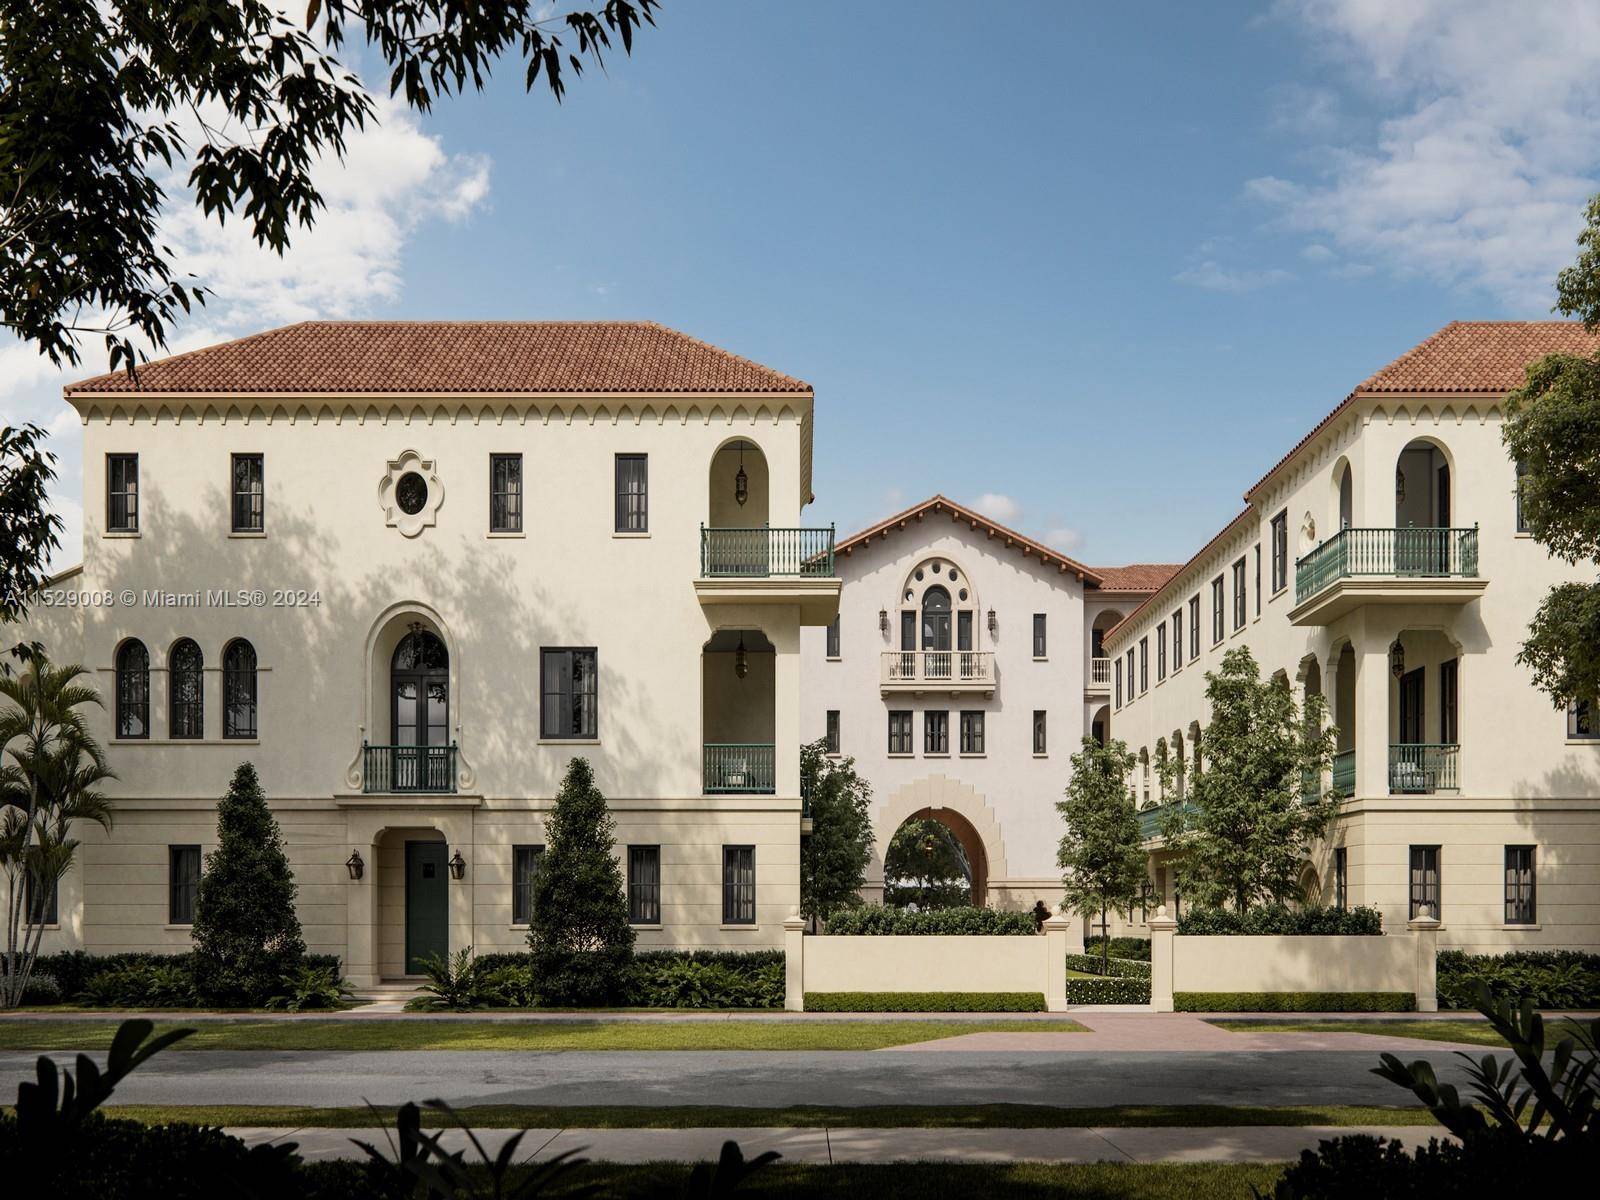 Introducing the Townhomes at The Villages at Coral Gables, the most exclusive new construction offering in the City Beautiful.